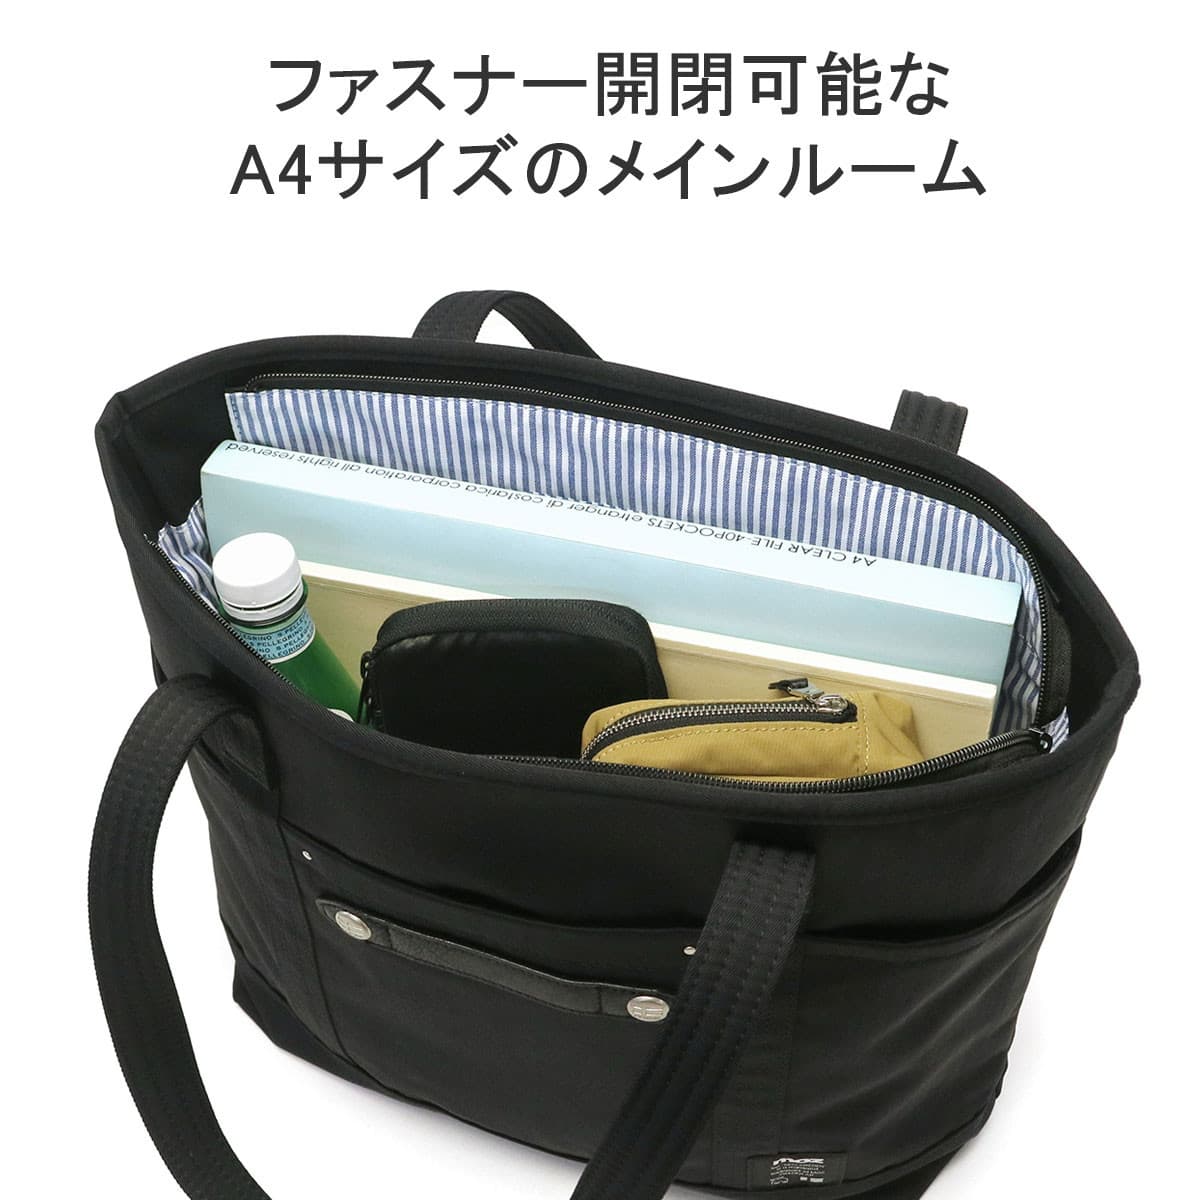 moz モズ EVERY トートバッグ 13L ZZCI-09A｜【正規販売店】カバン 